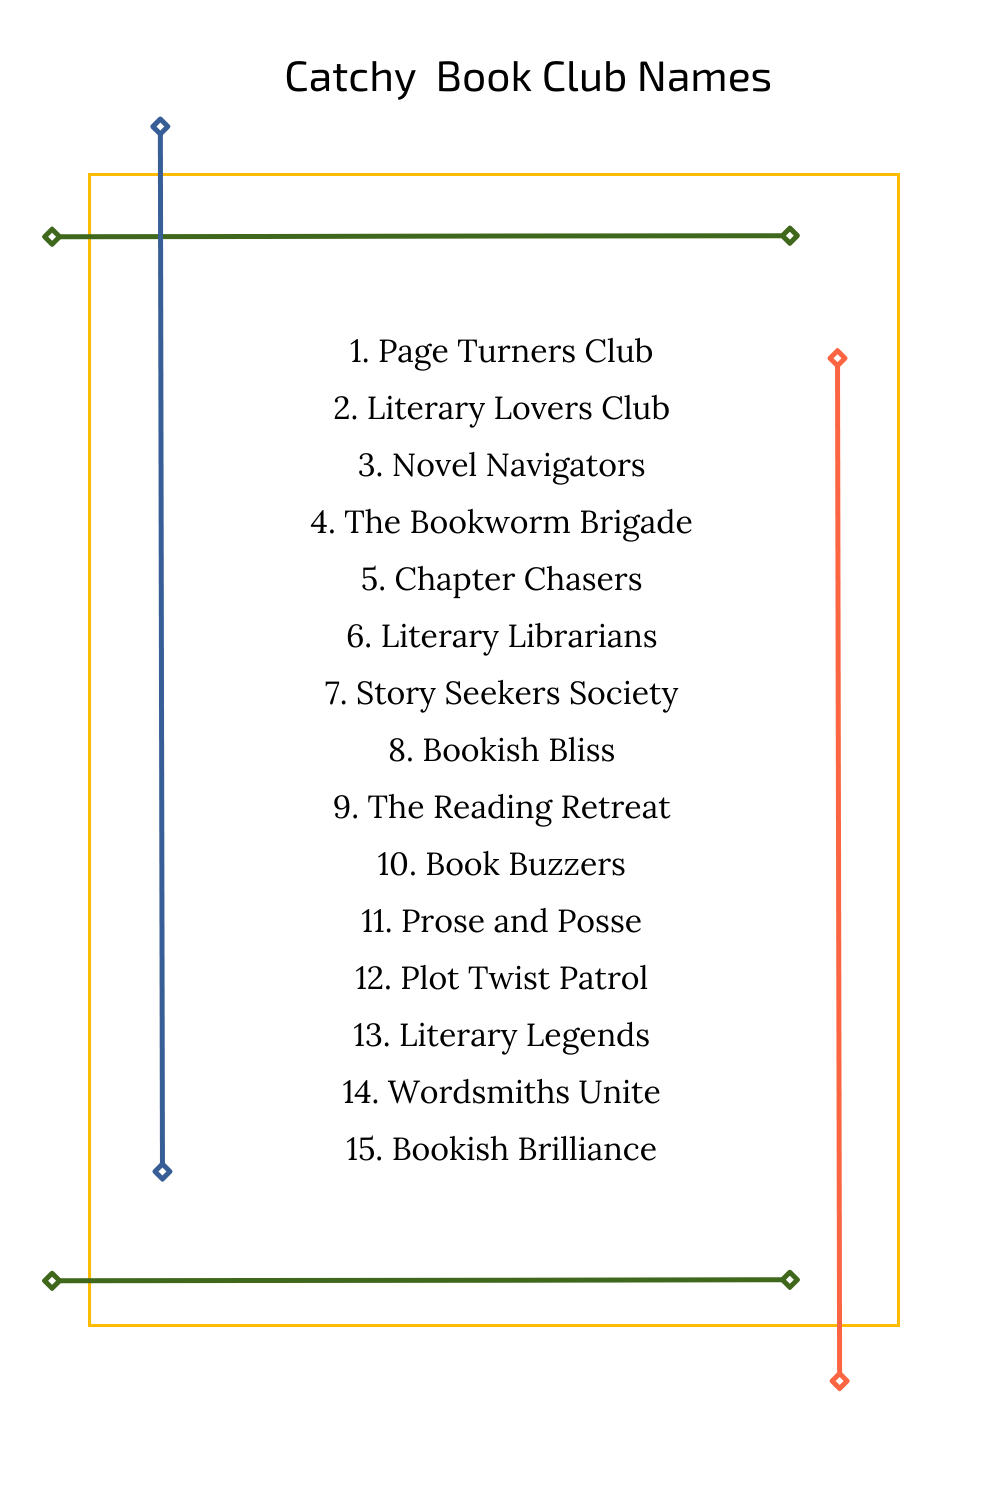 Catchy Book Club Names